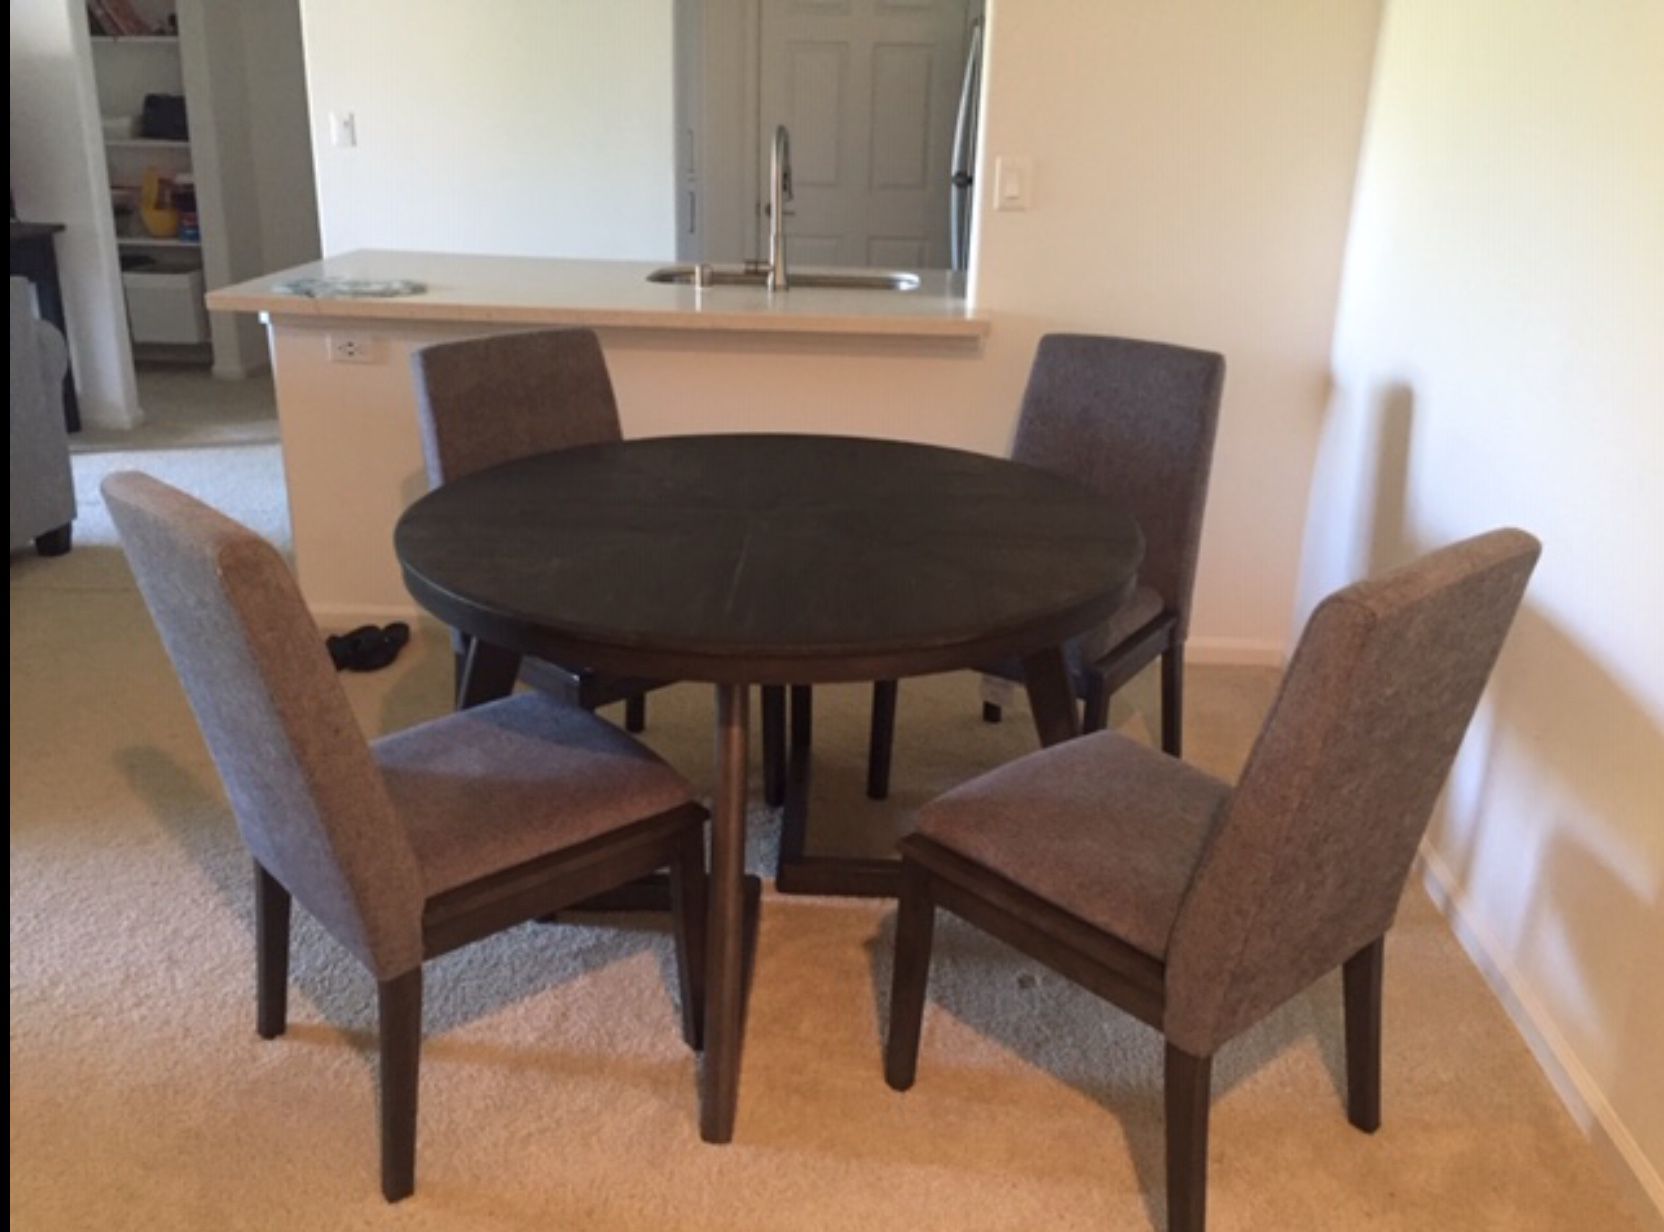 Dining set: Dining Table, 4 Chairs